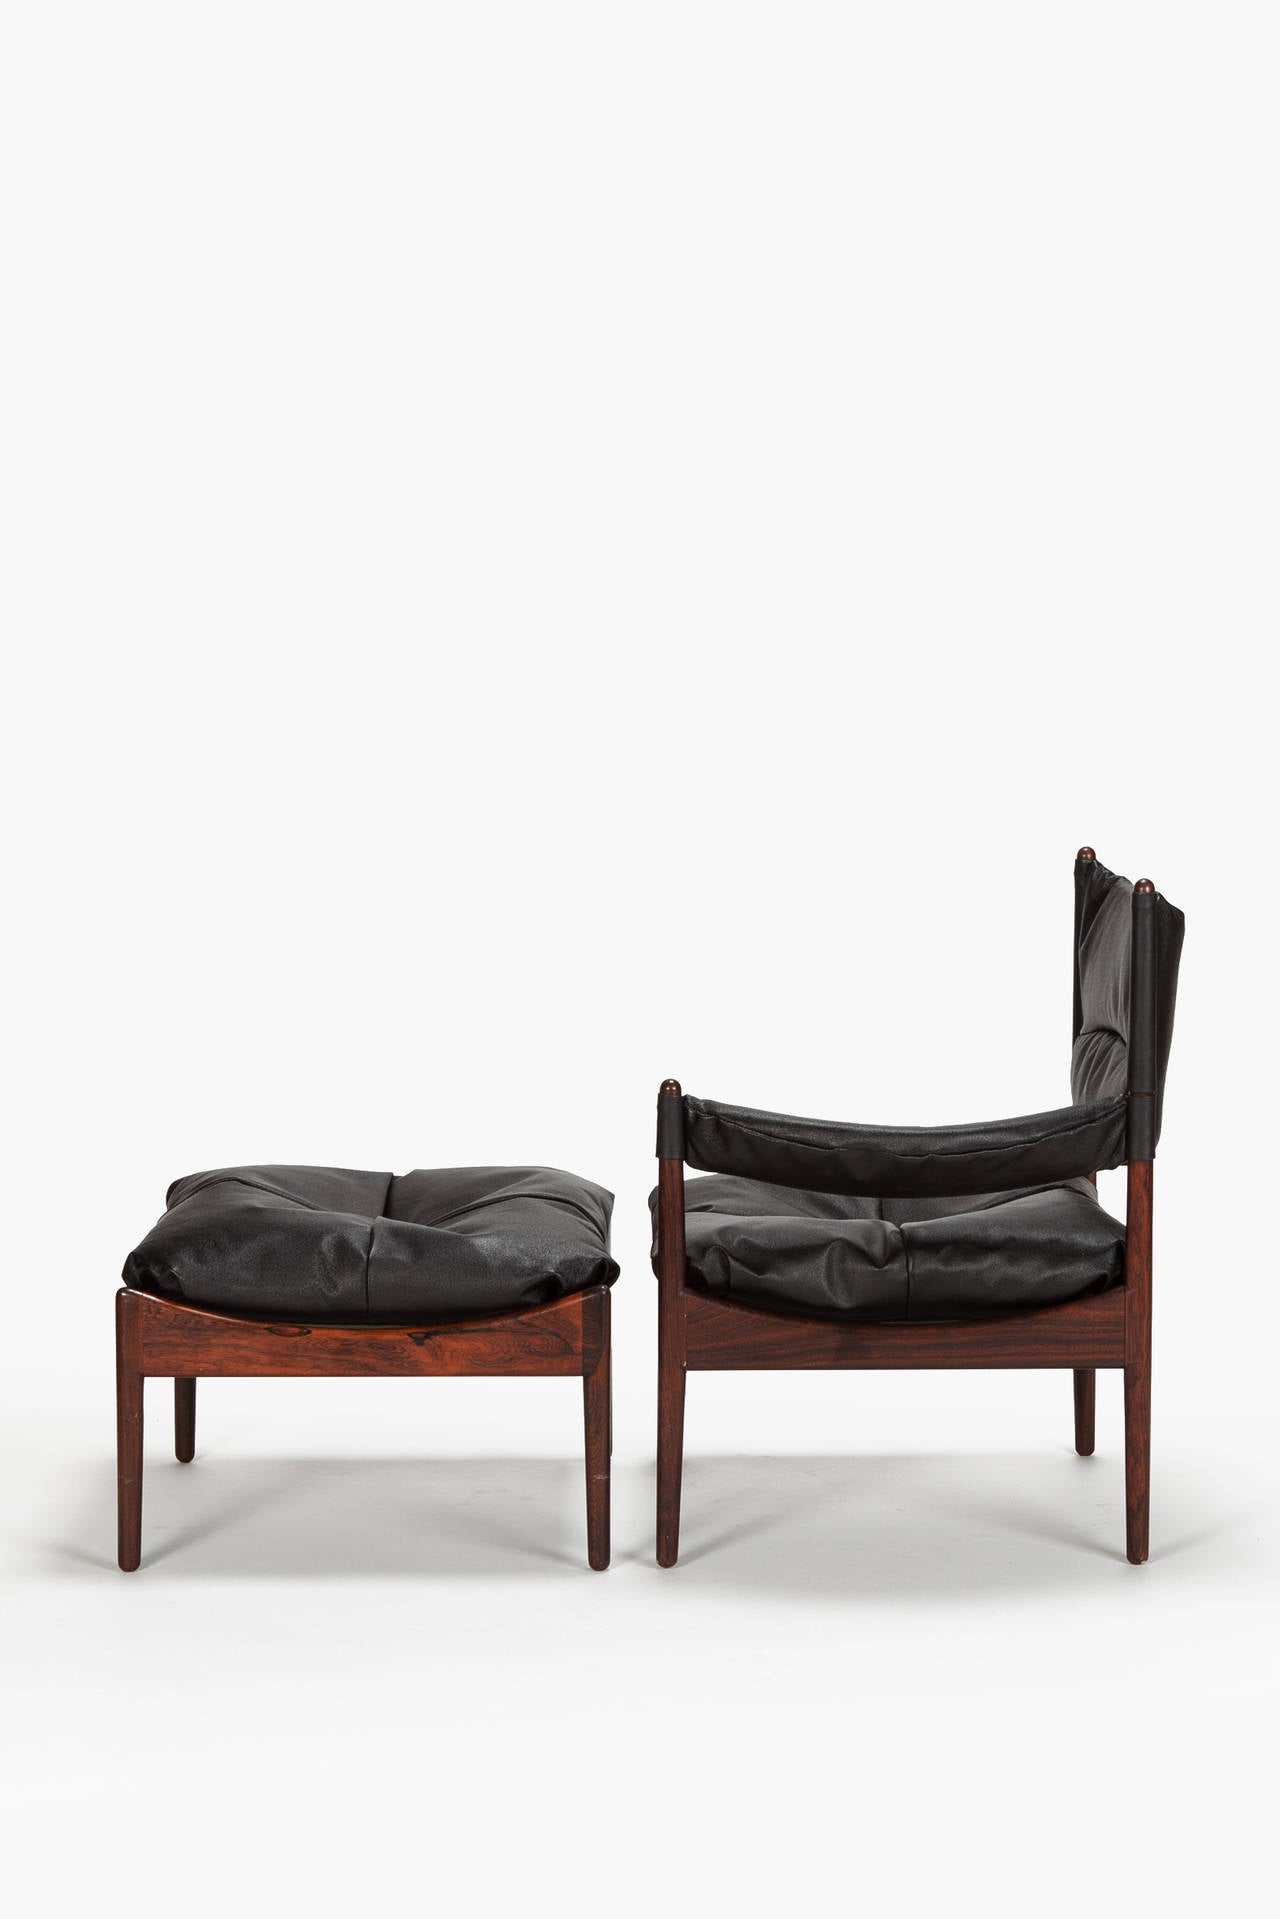 Mid-20th Century Danish Rosewood Modus Lounge Chair Set by Kristian Solmer Vedel, 1960s